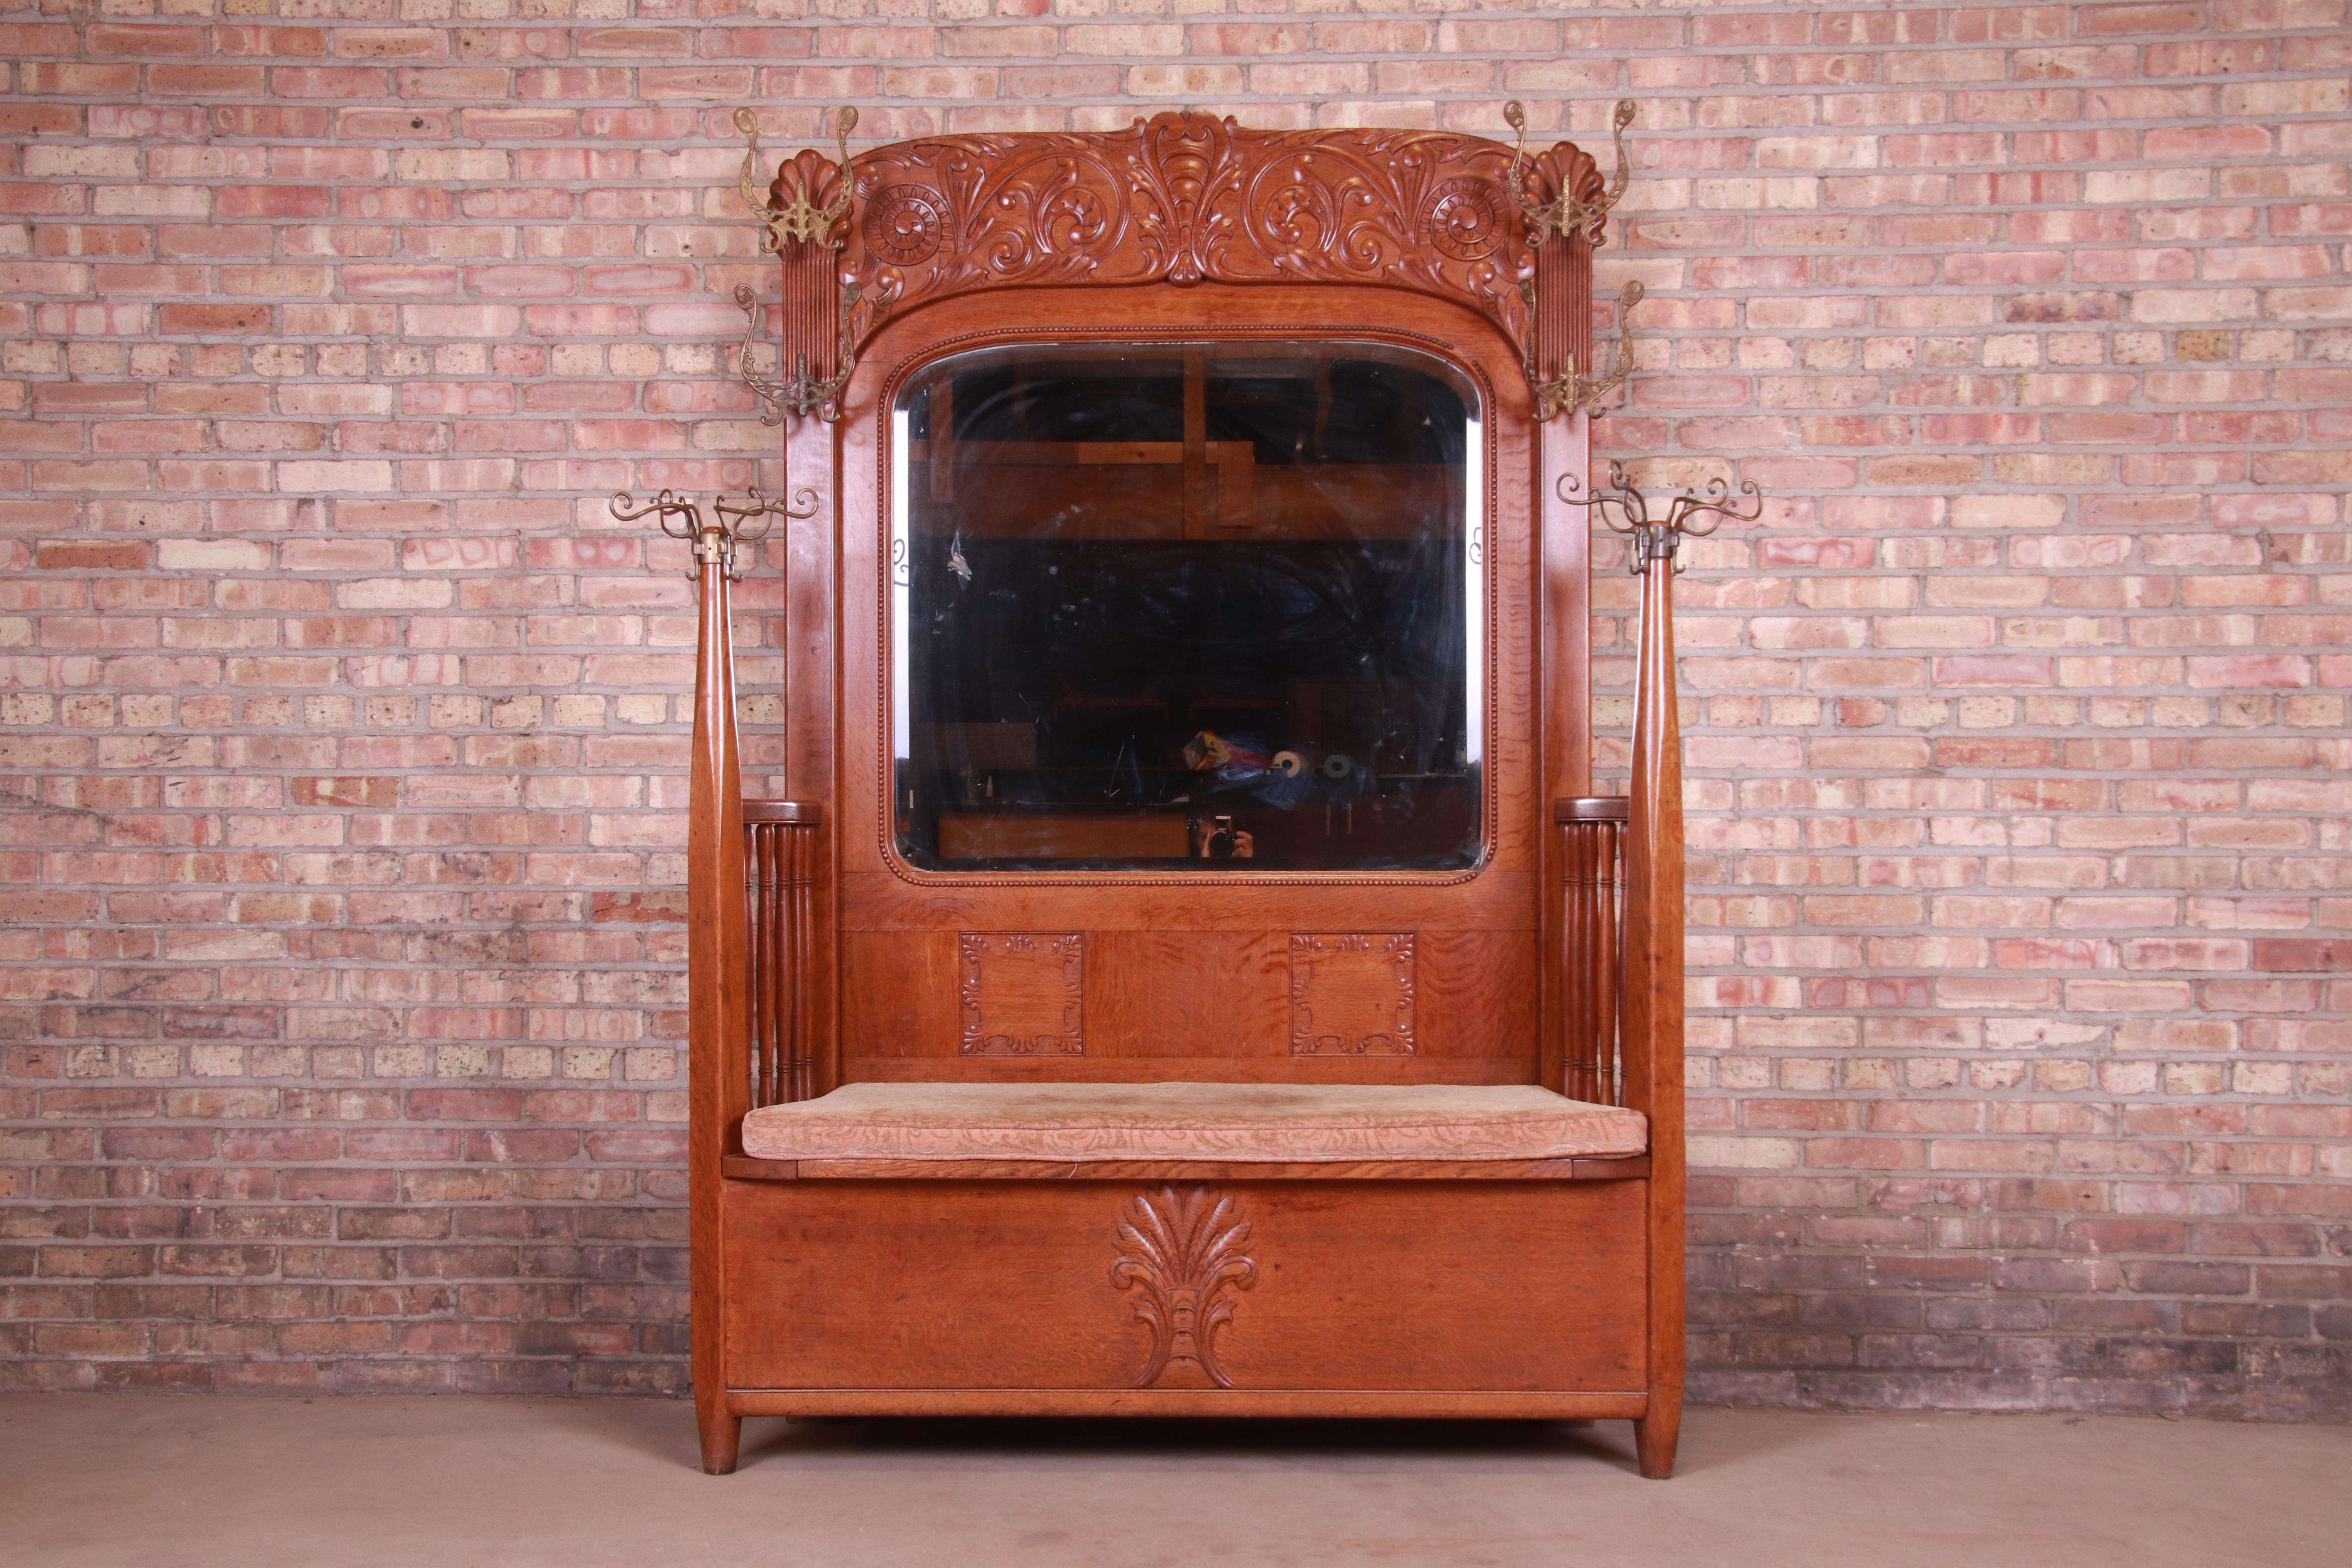 American R. J. Horner Carved Solid Oak Hall Bench with Mirror, circa 1890